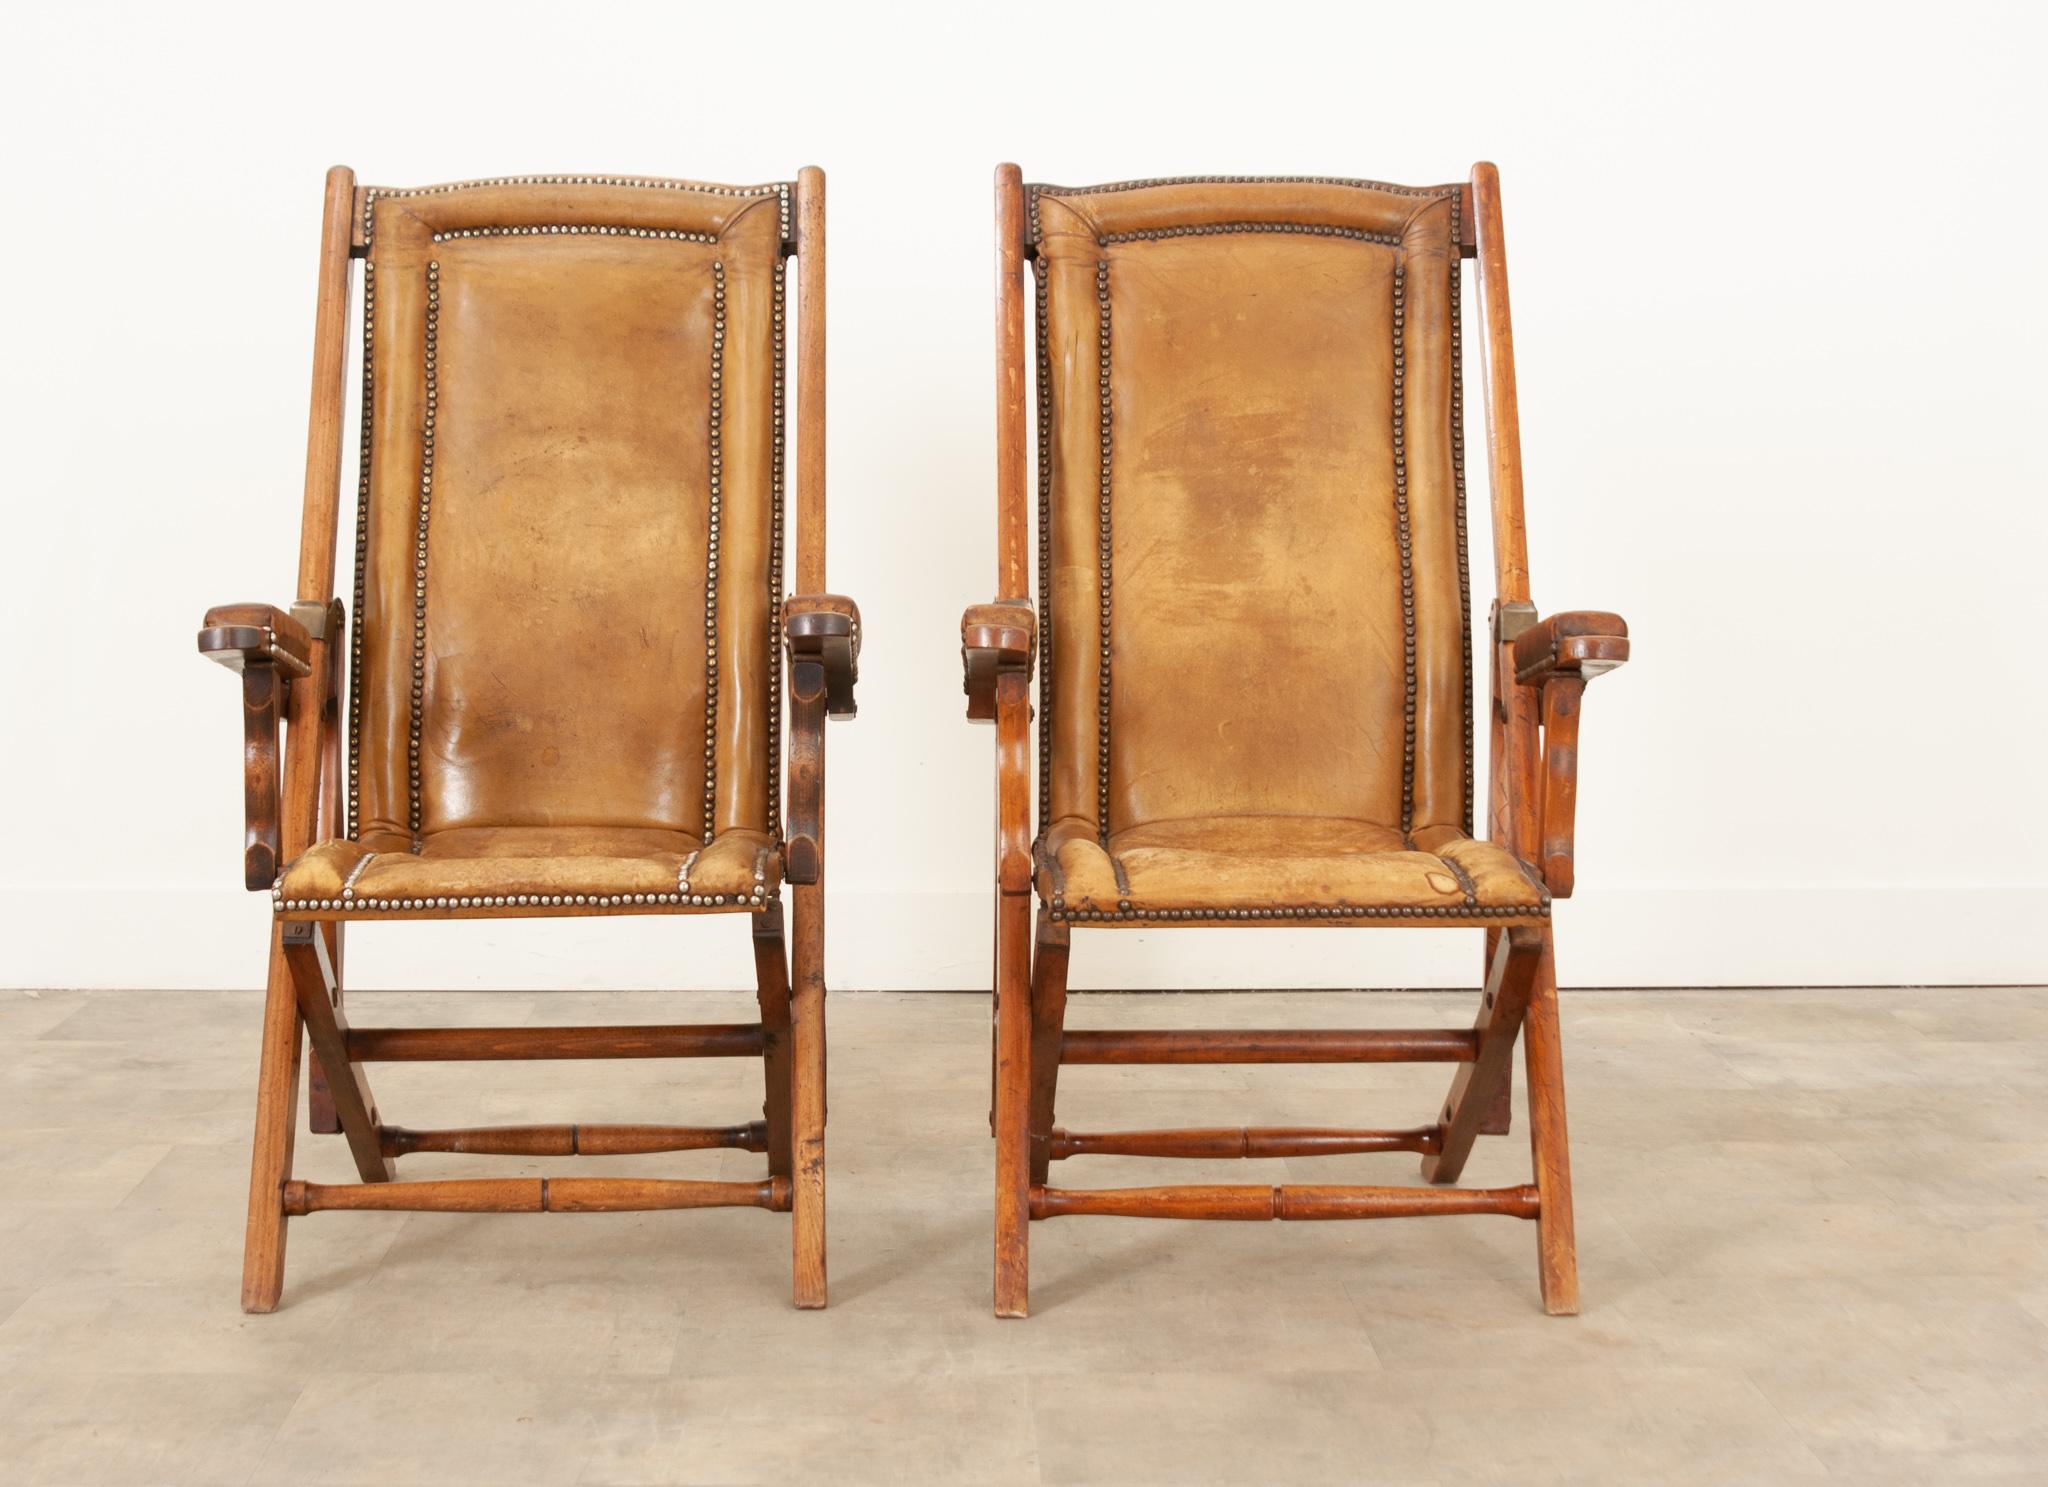 Hand-Carved French Early 20th Century Folding Campaign Chairs